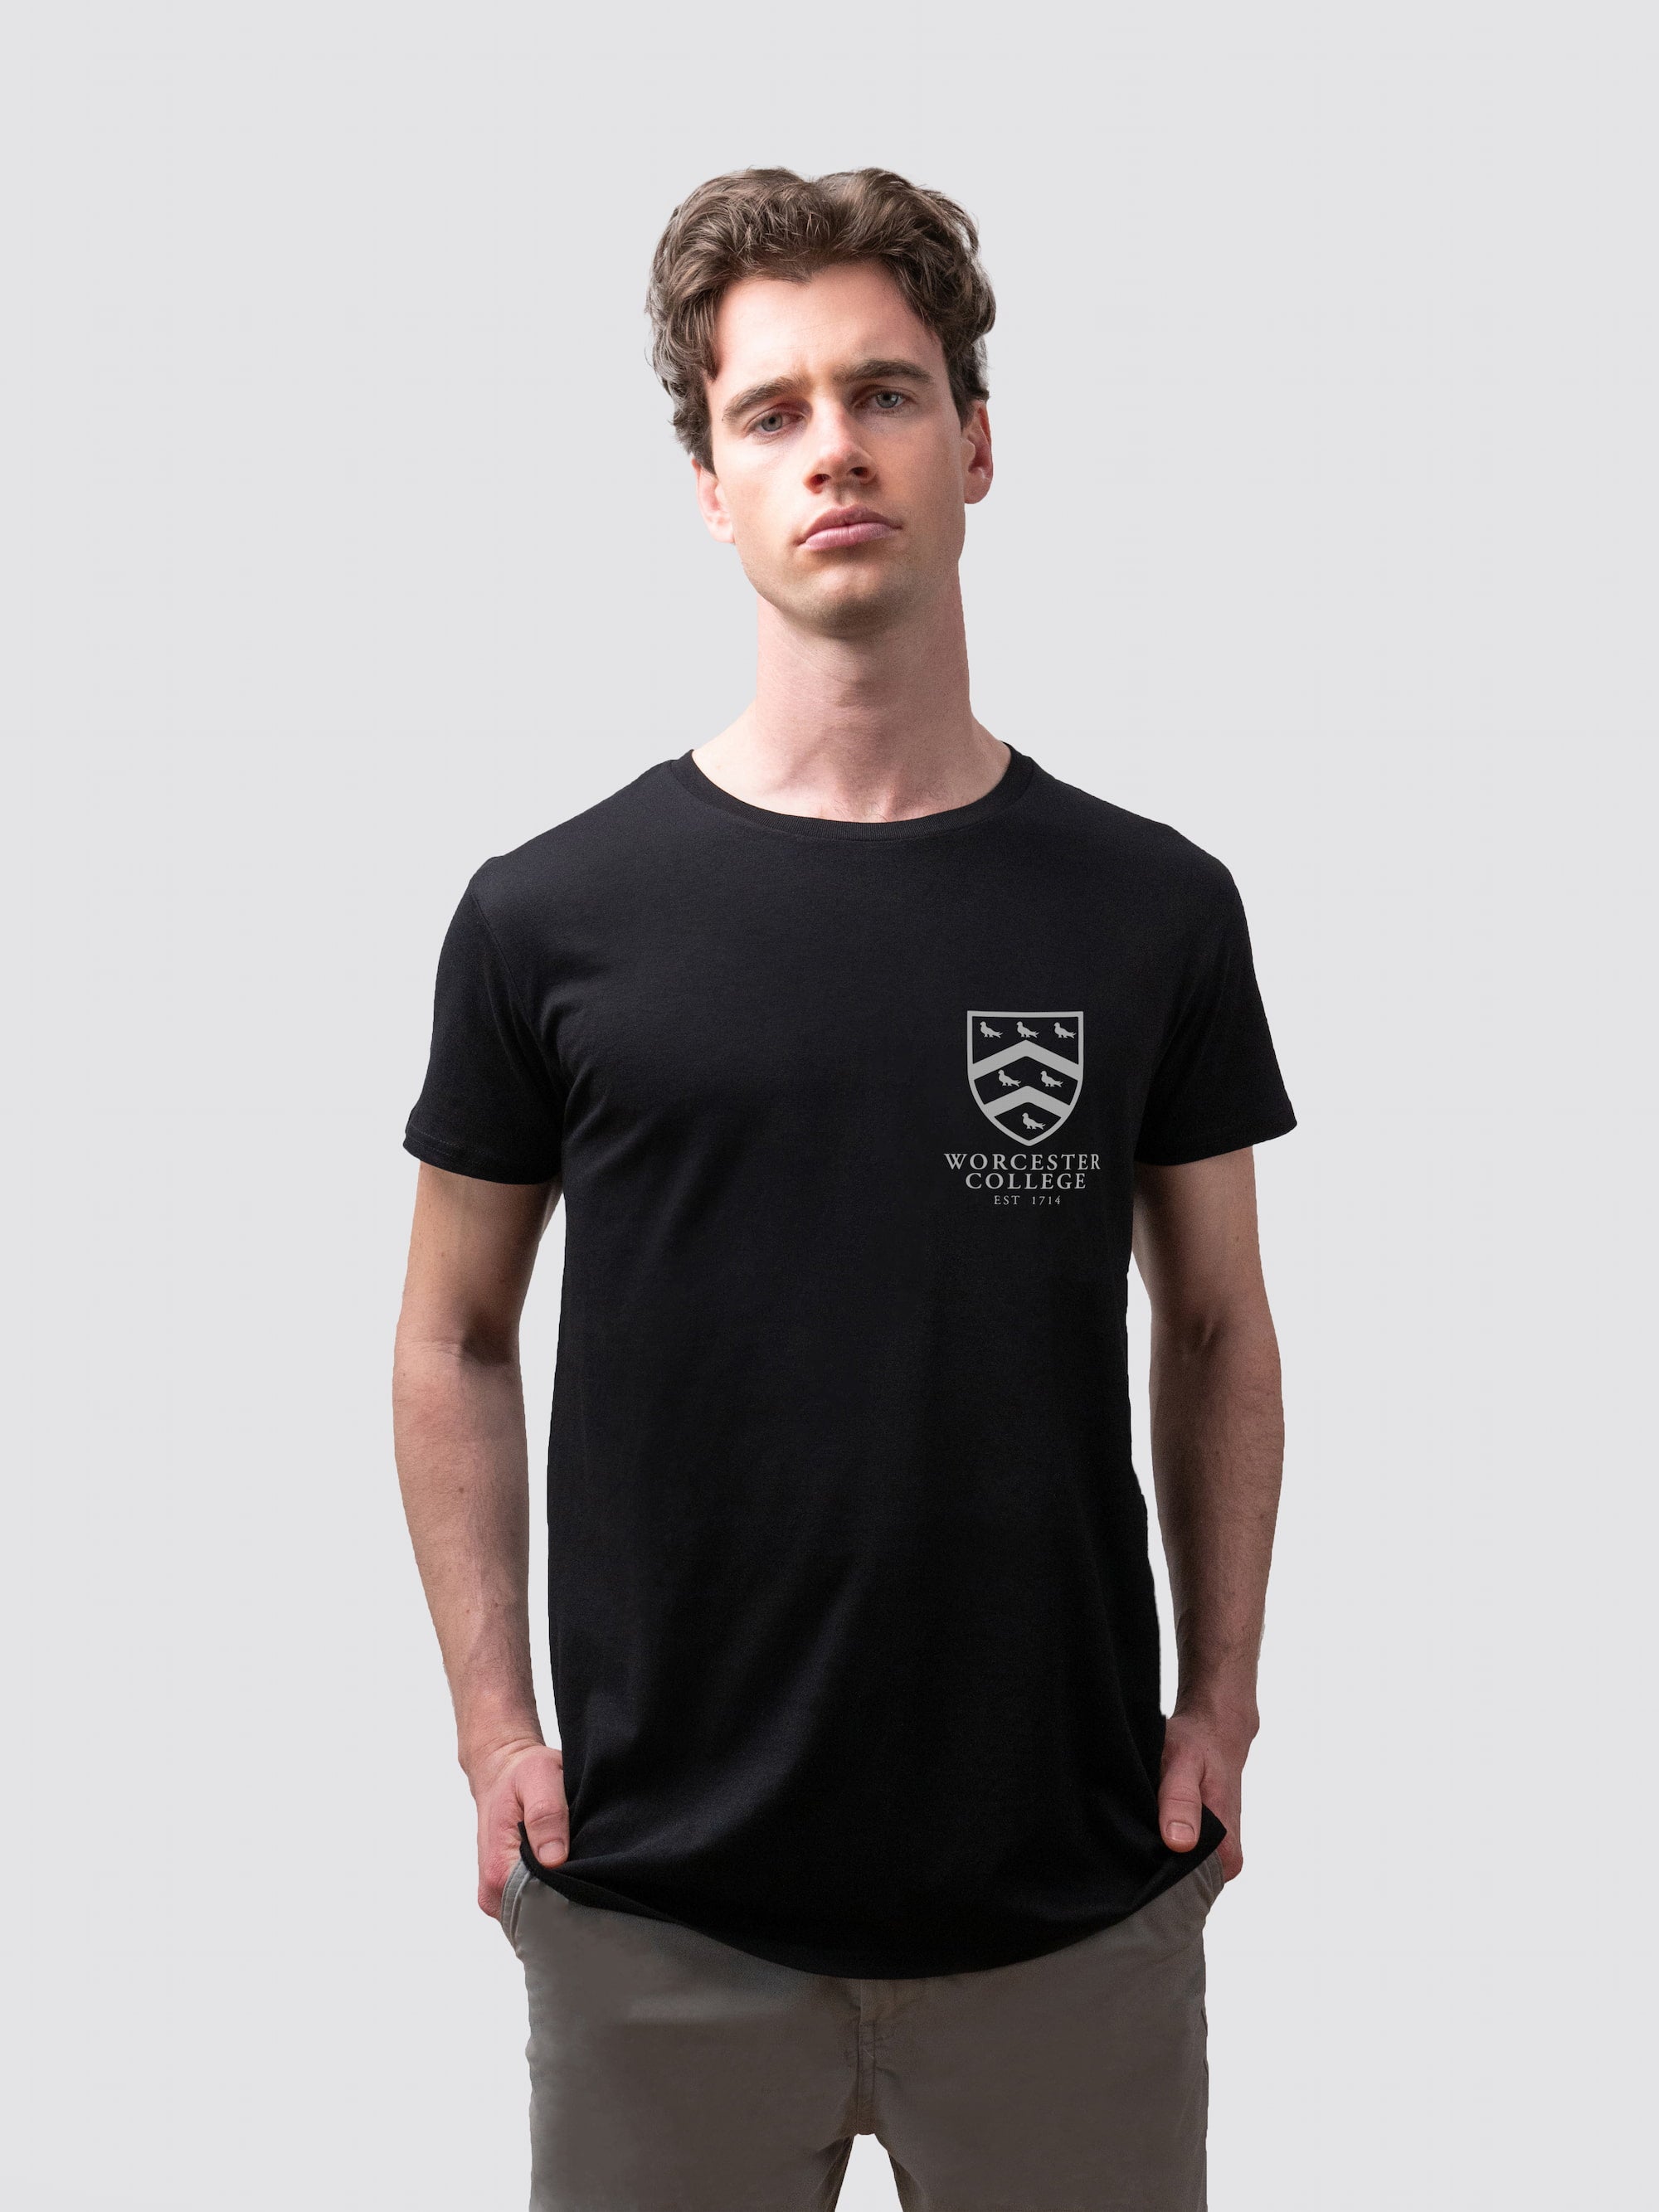 Sustainable Worcester t-shirt, made from organic cotton